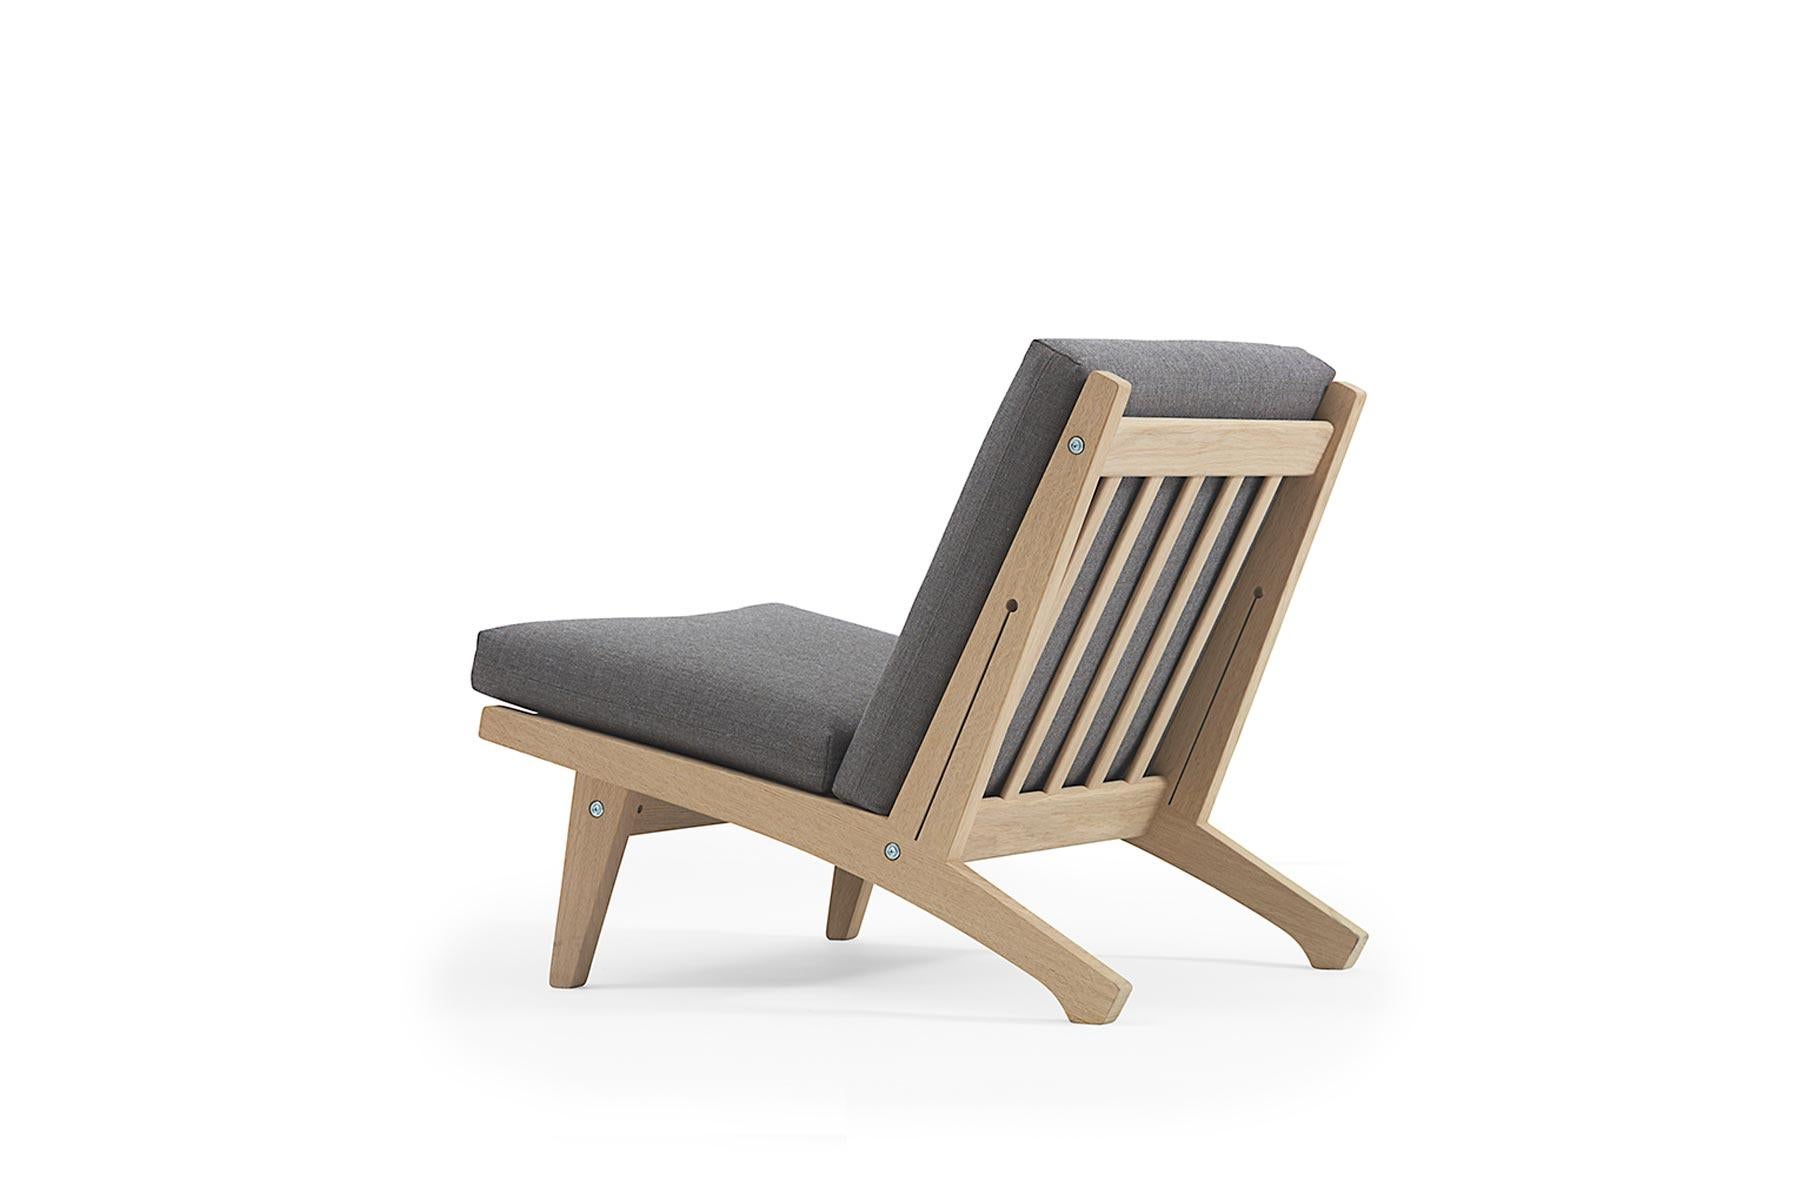 Designed in 1969 by Hans Wegner, the 370 lounge chair pairs clean lines with remarkable craftsmanship. The chair is handcrafted at GETAMA’s factory in Gedsted, Denmark by skilled cabinetmakers using traditional Scandinavian techniques.

Available